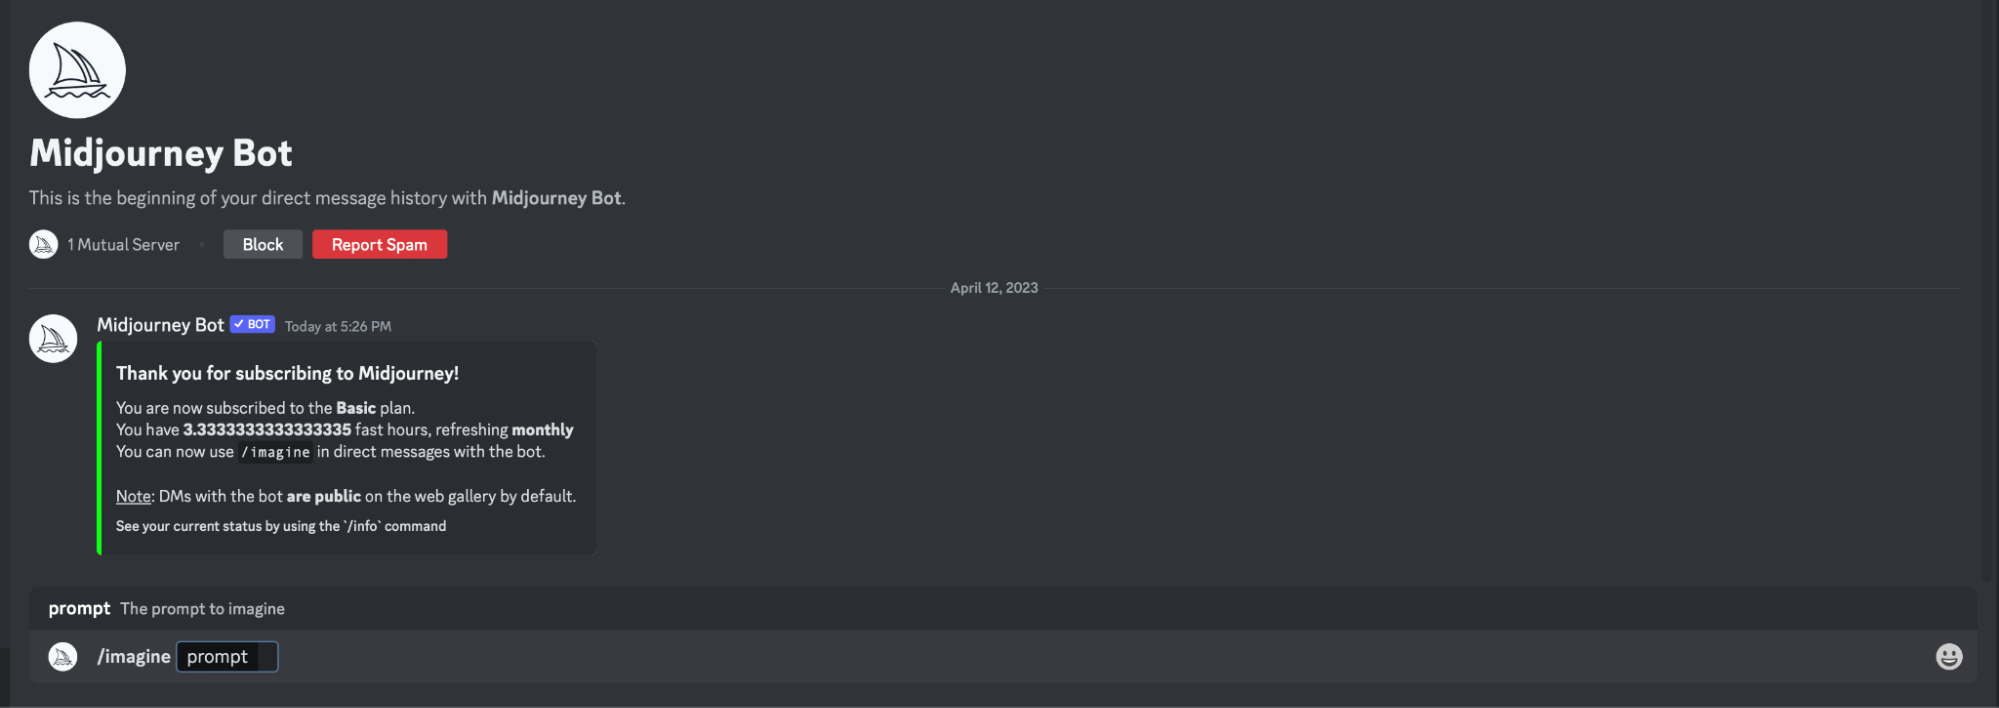 The 5 best discord bots right now with commands!